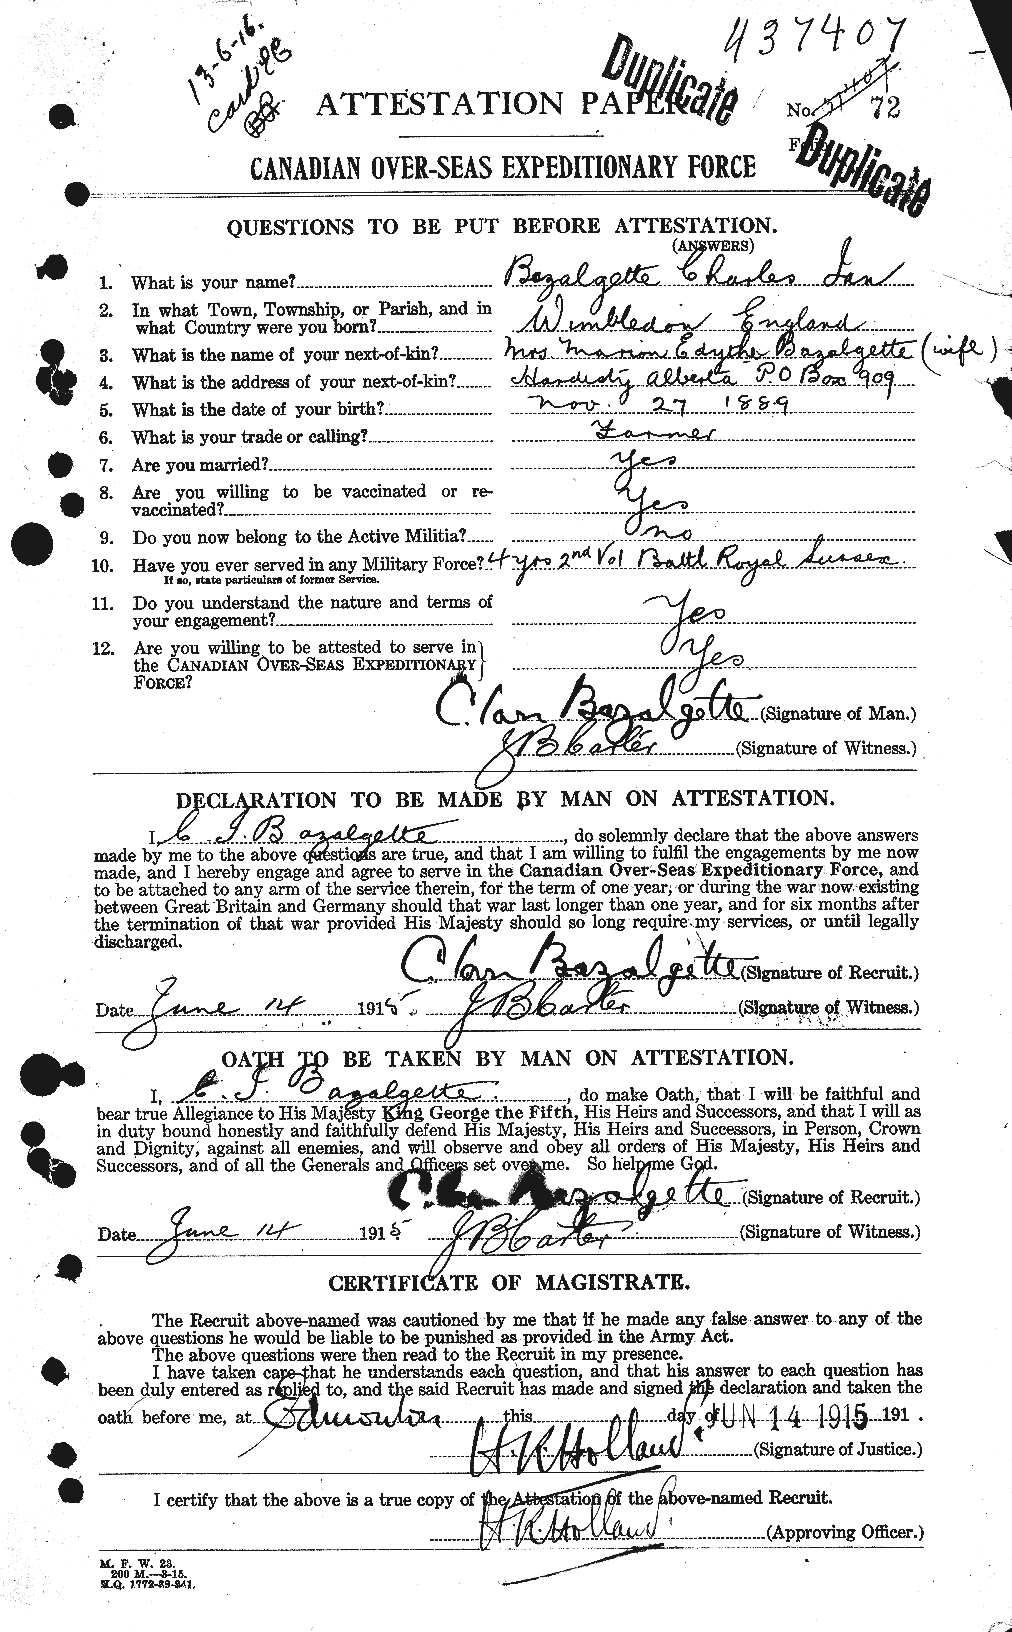 Personnel Records of the First World War - CEF 229824a